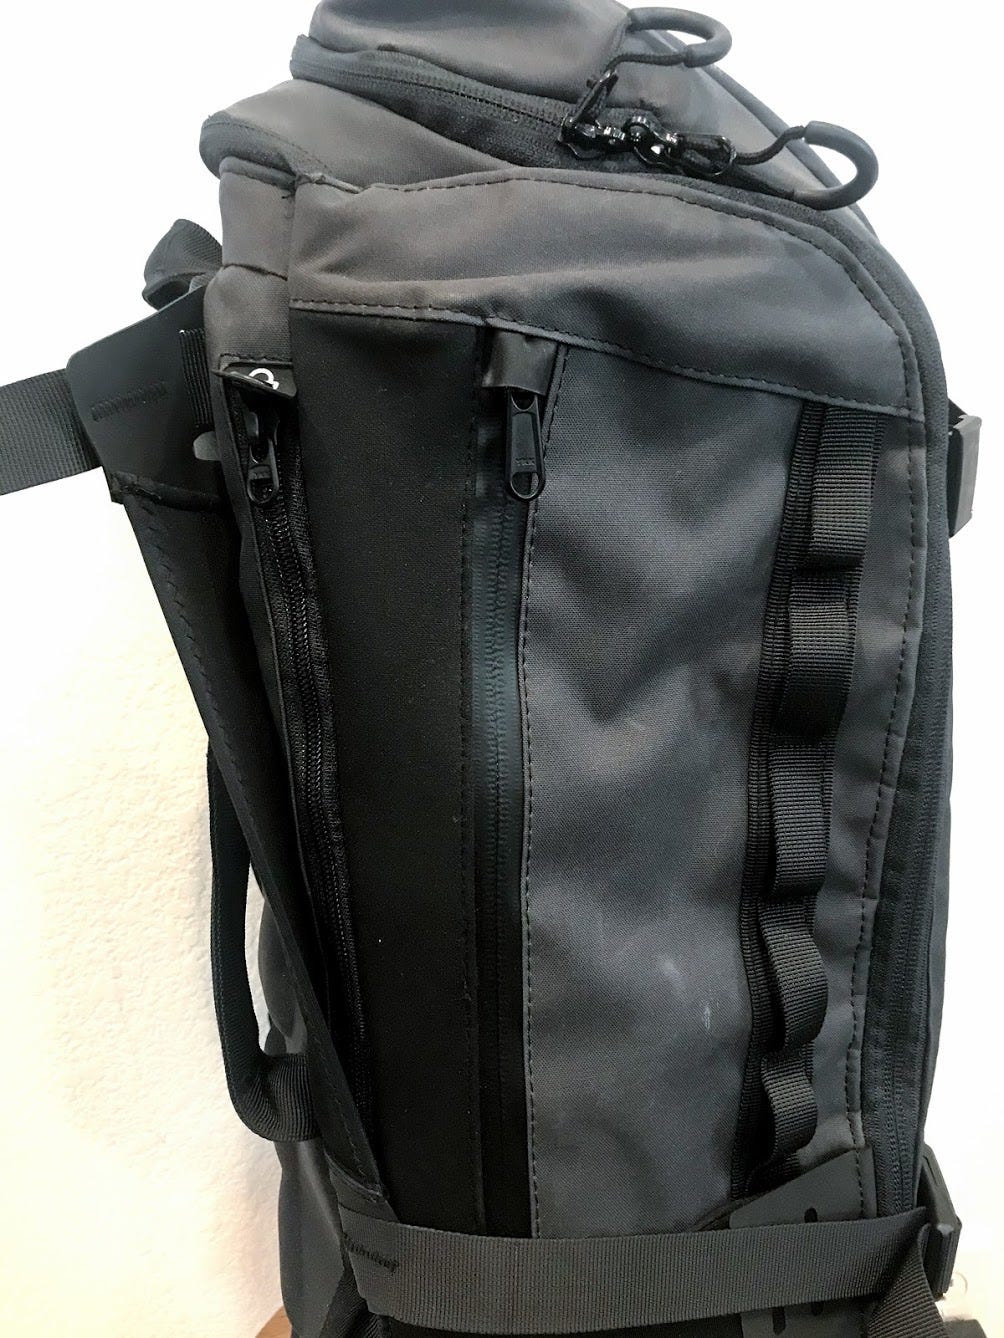 GOBAG Backpack Review. It’s time to review yet another one of… | by HL ...